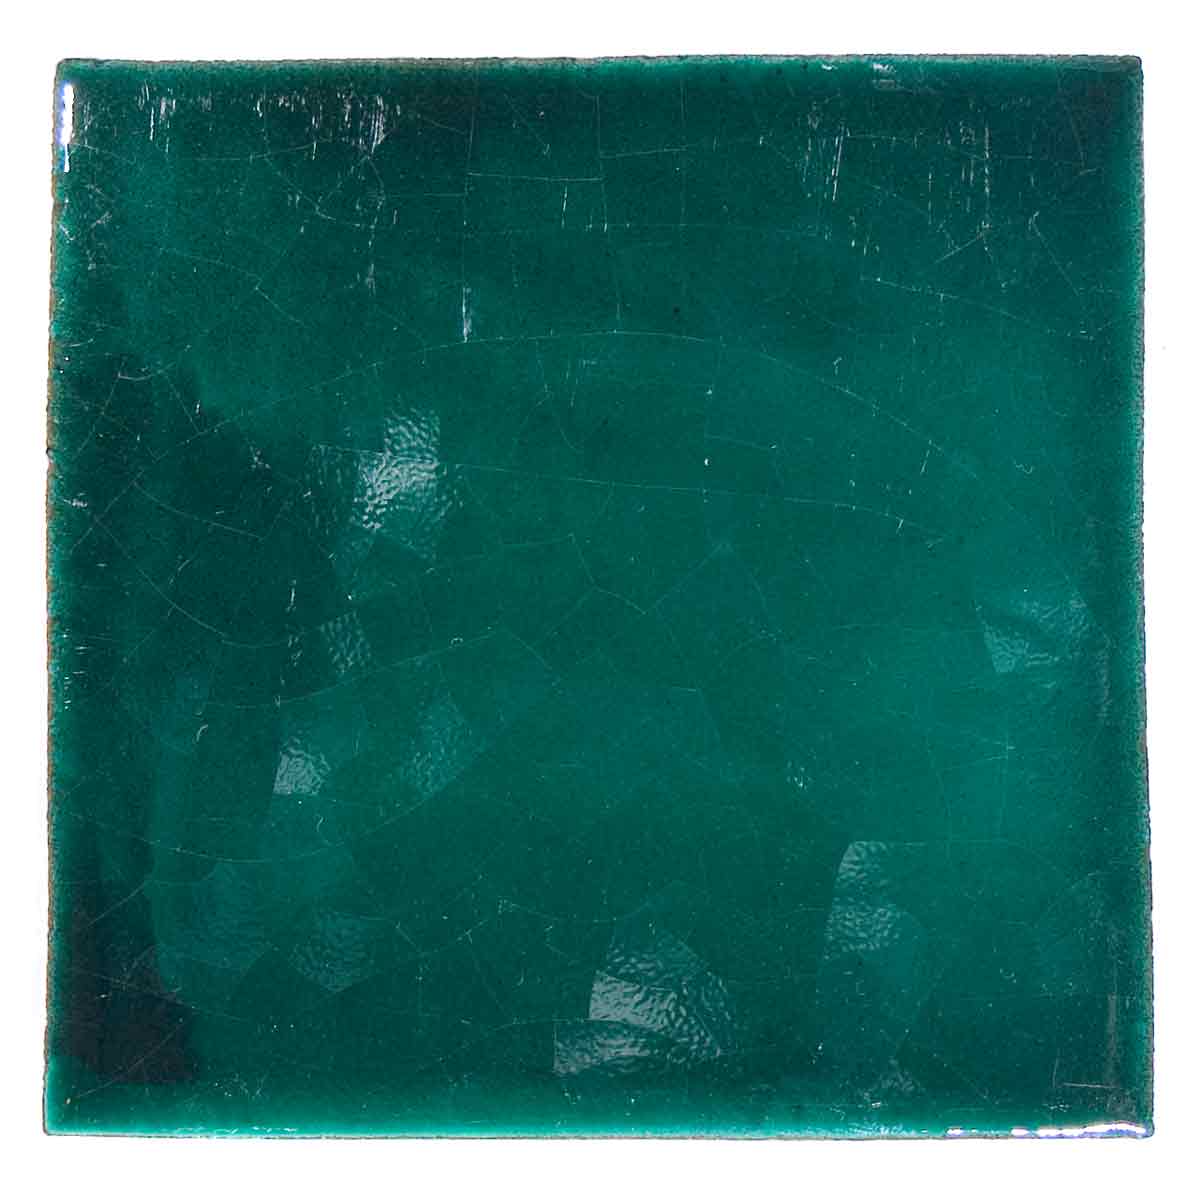  Special green 10.5 x 10.5cm